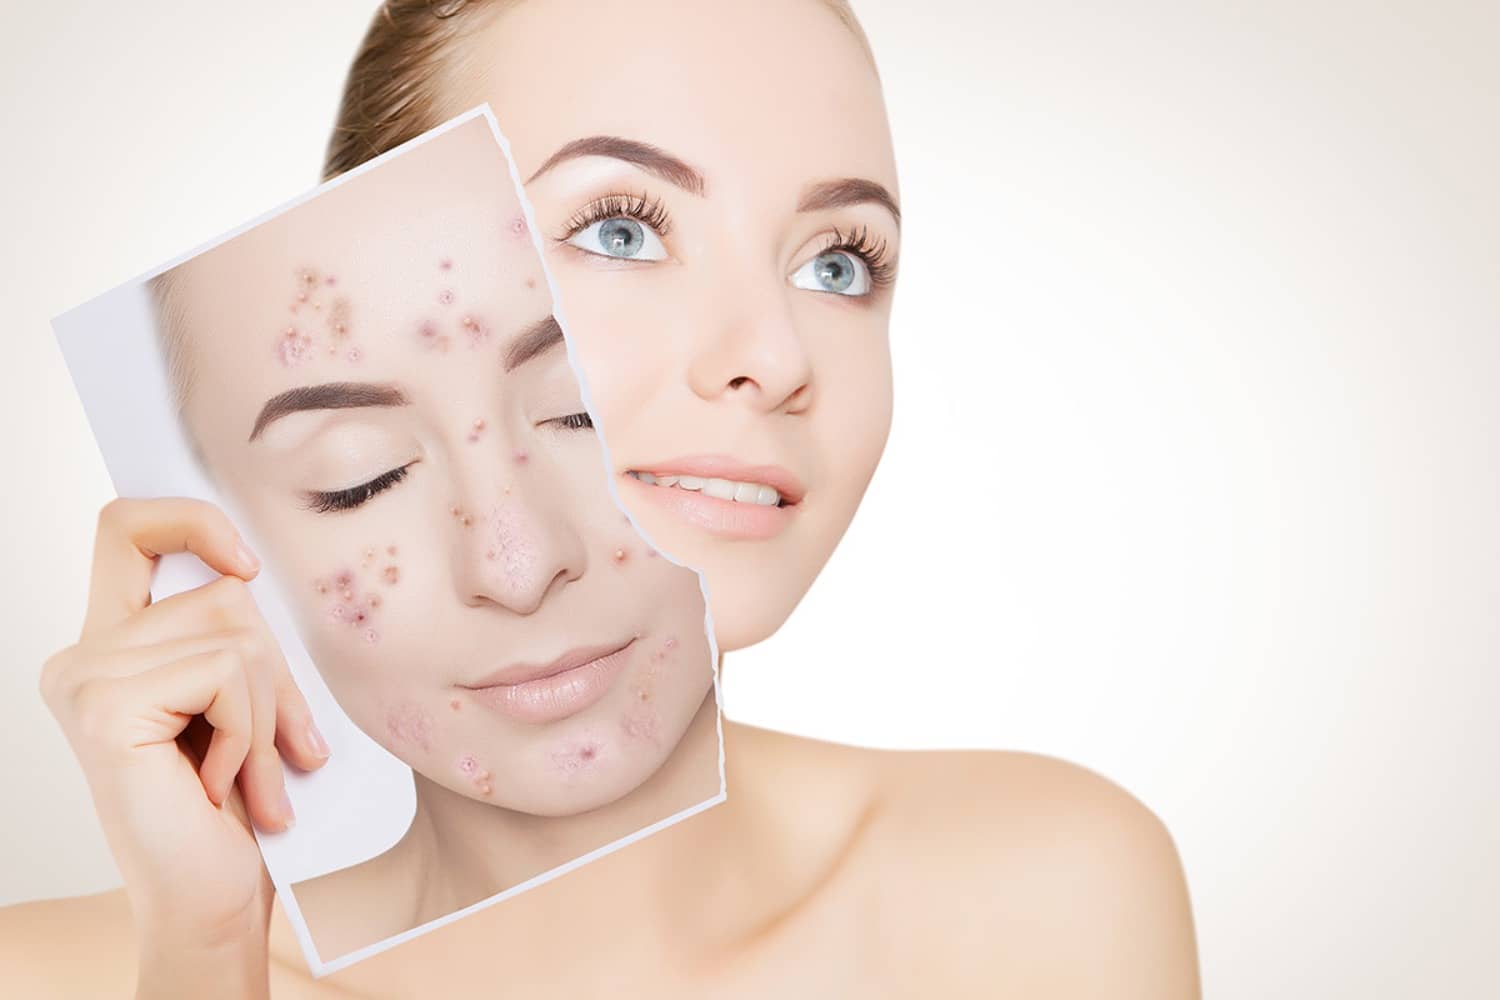 Best Med Spa Treatments For Acne: Chemical Peels and HydroFacials